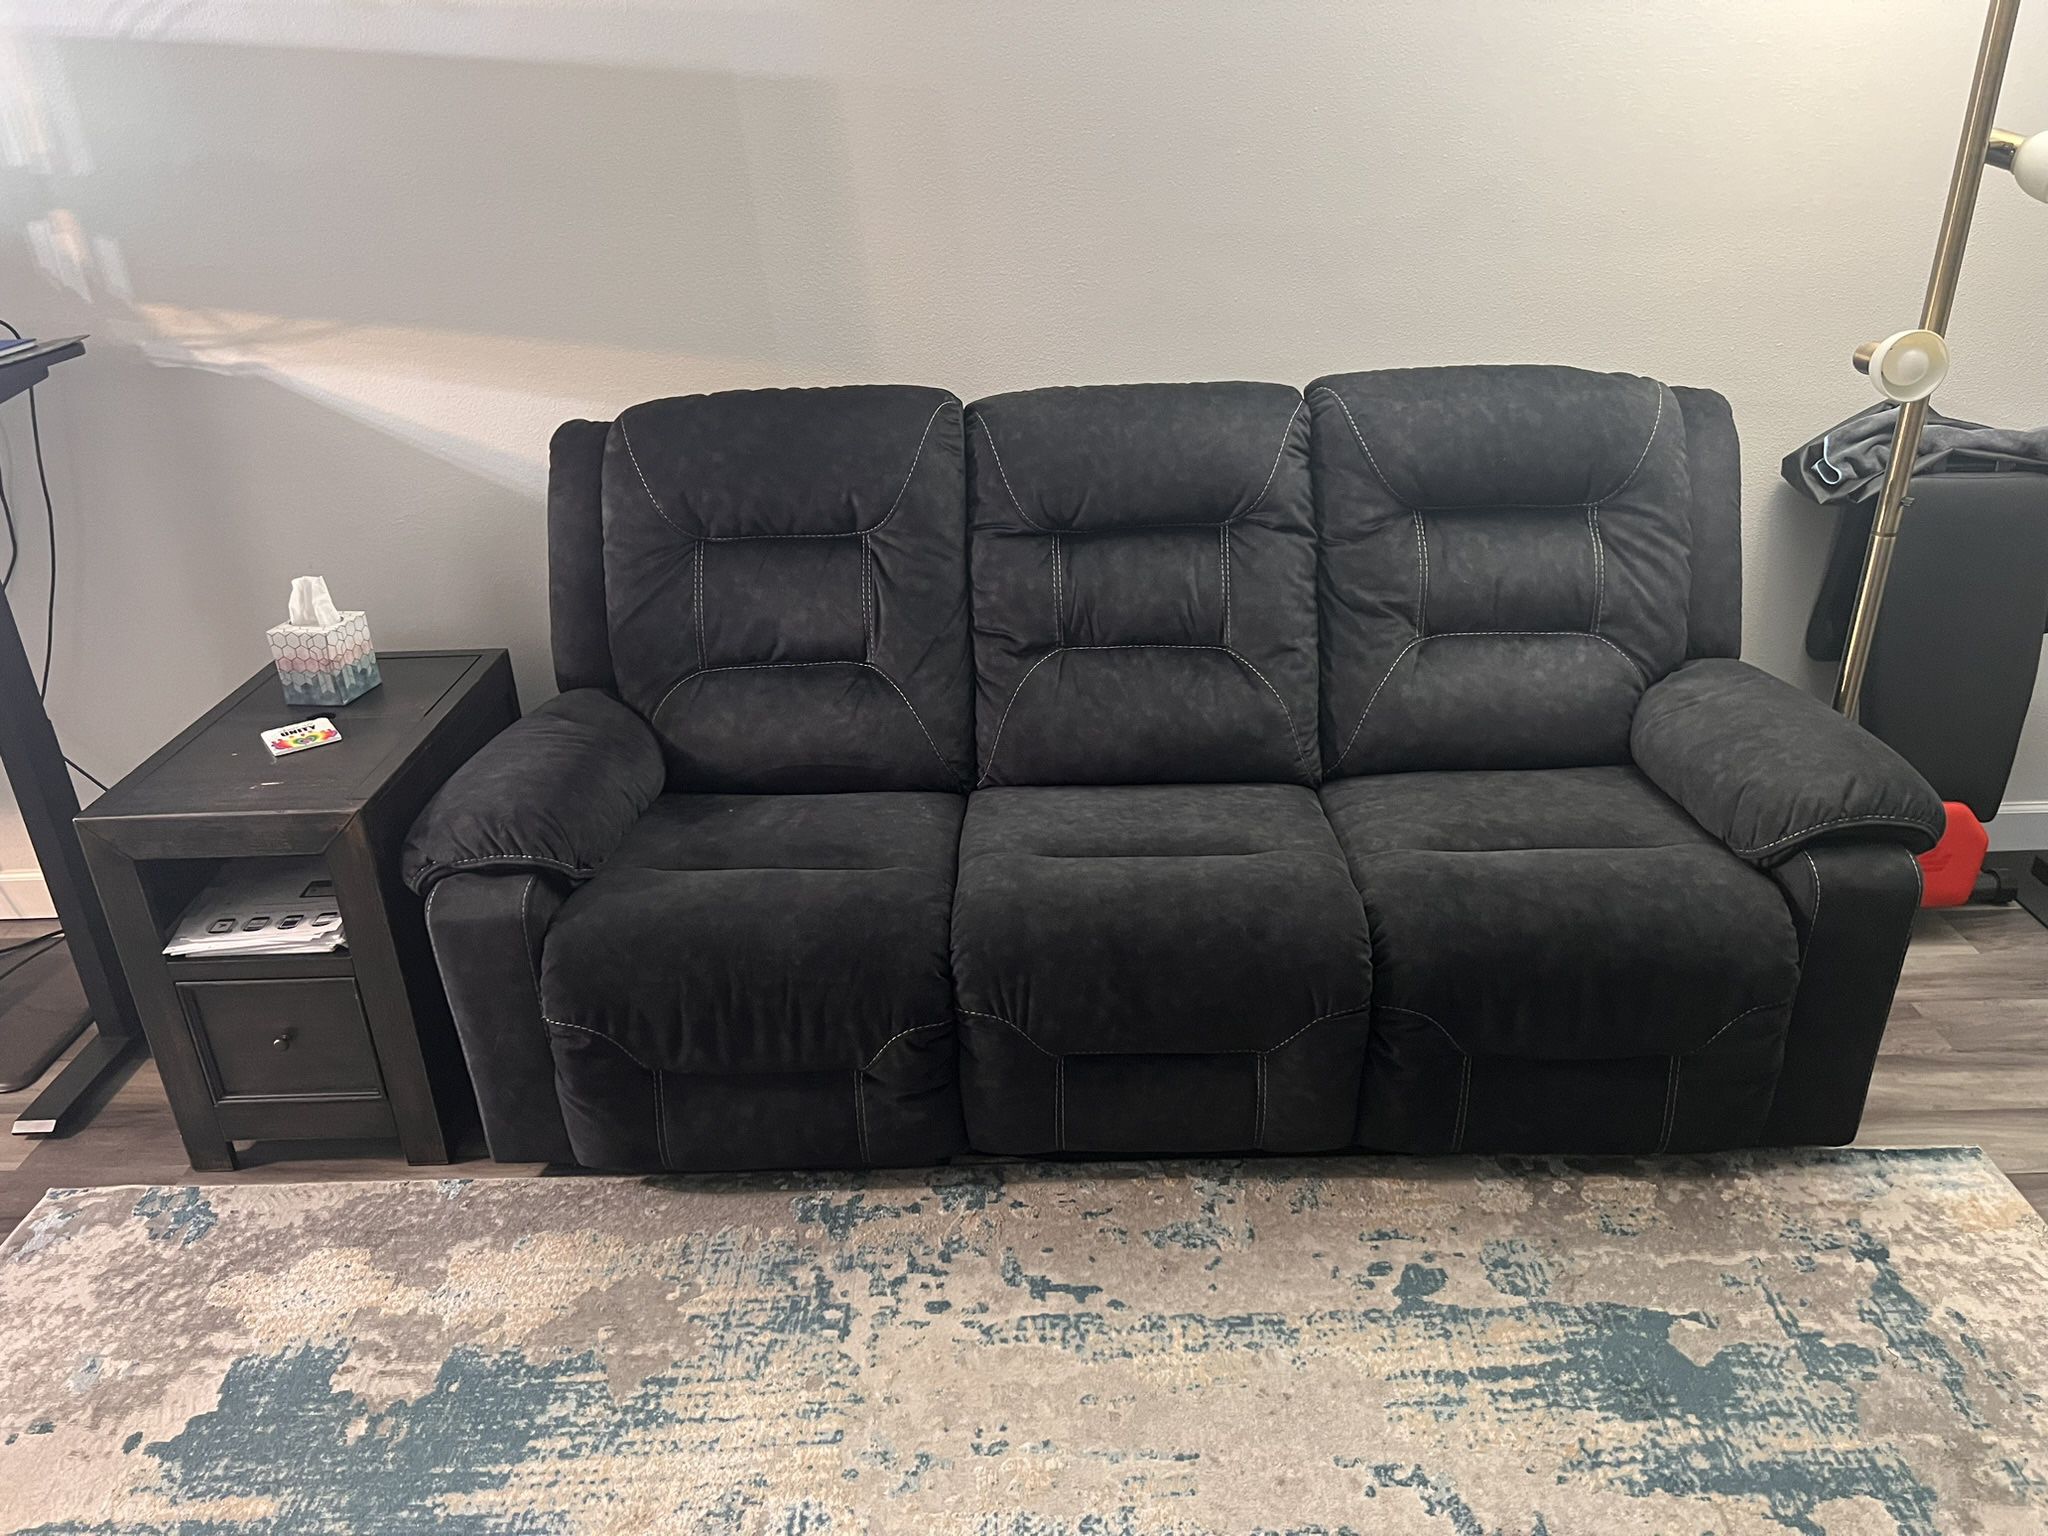 Two Recliner Sofa